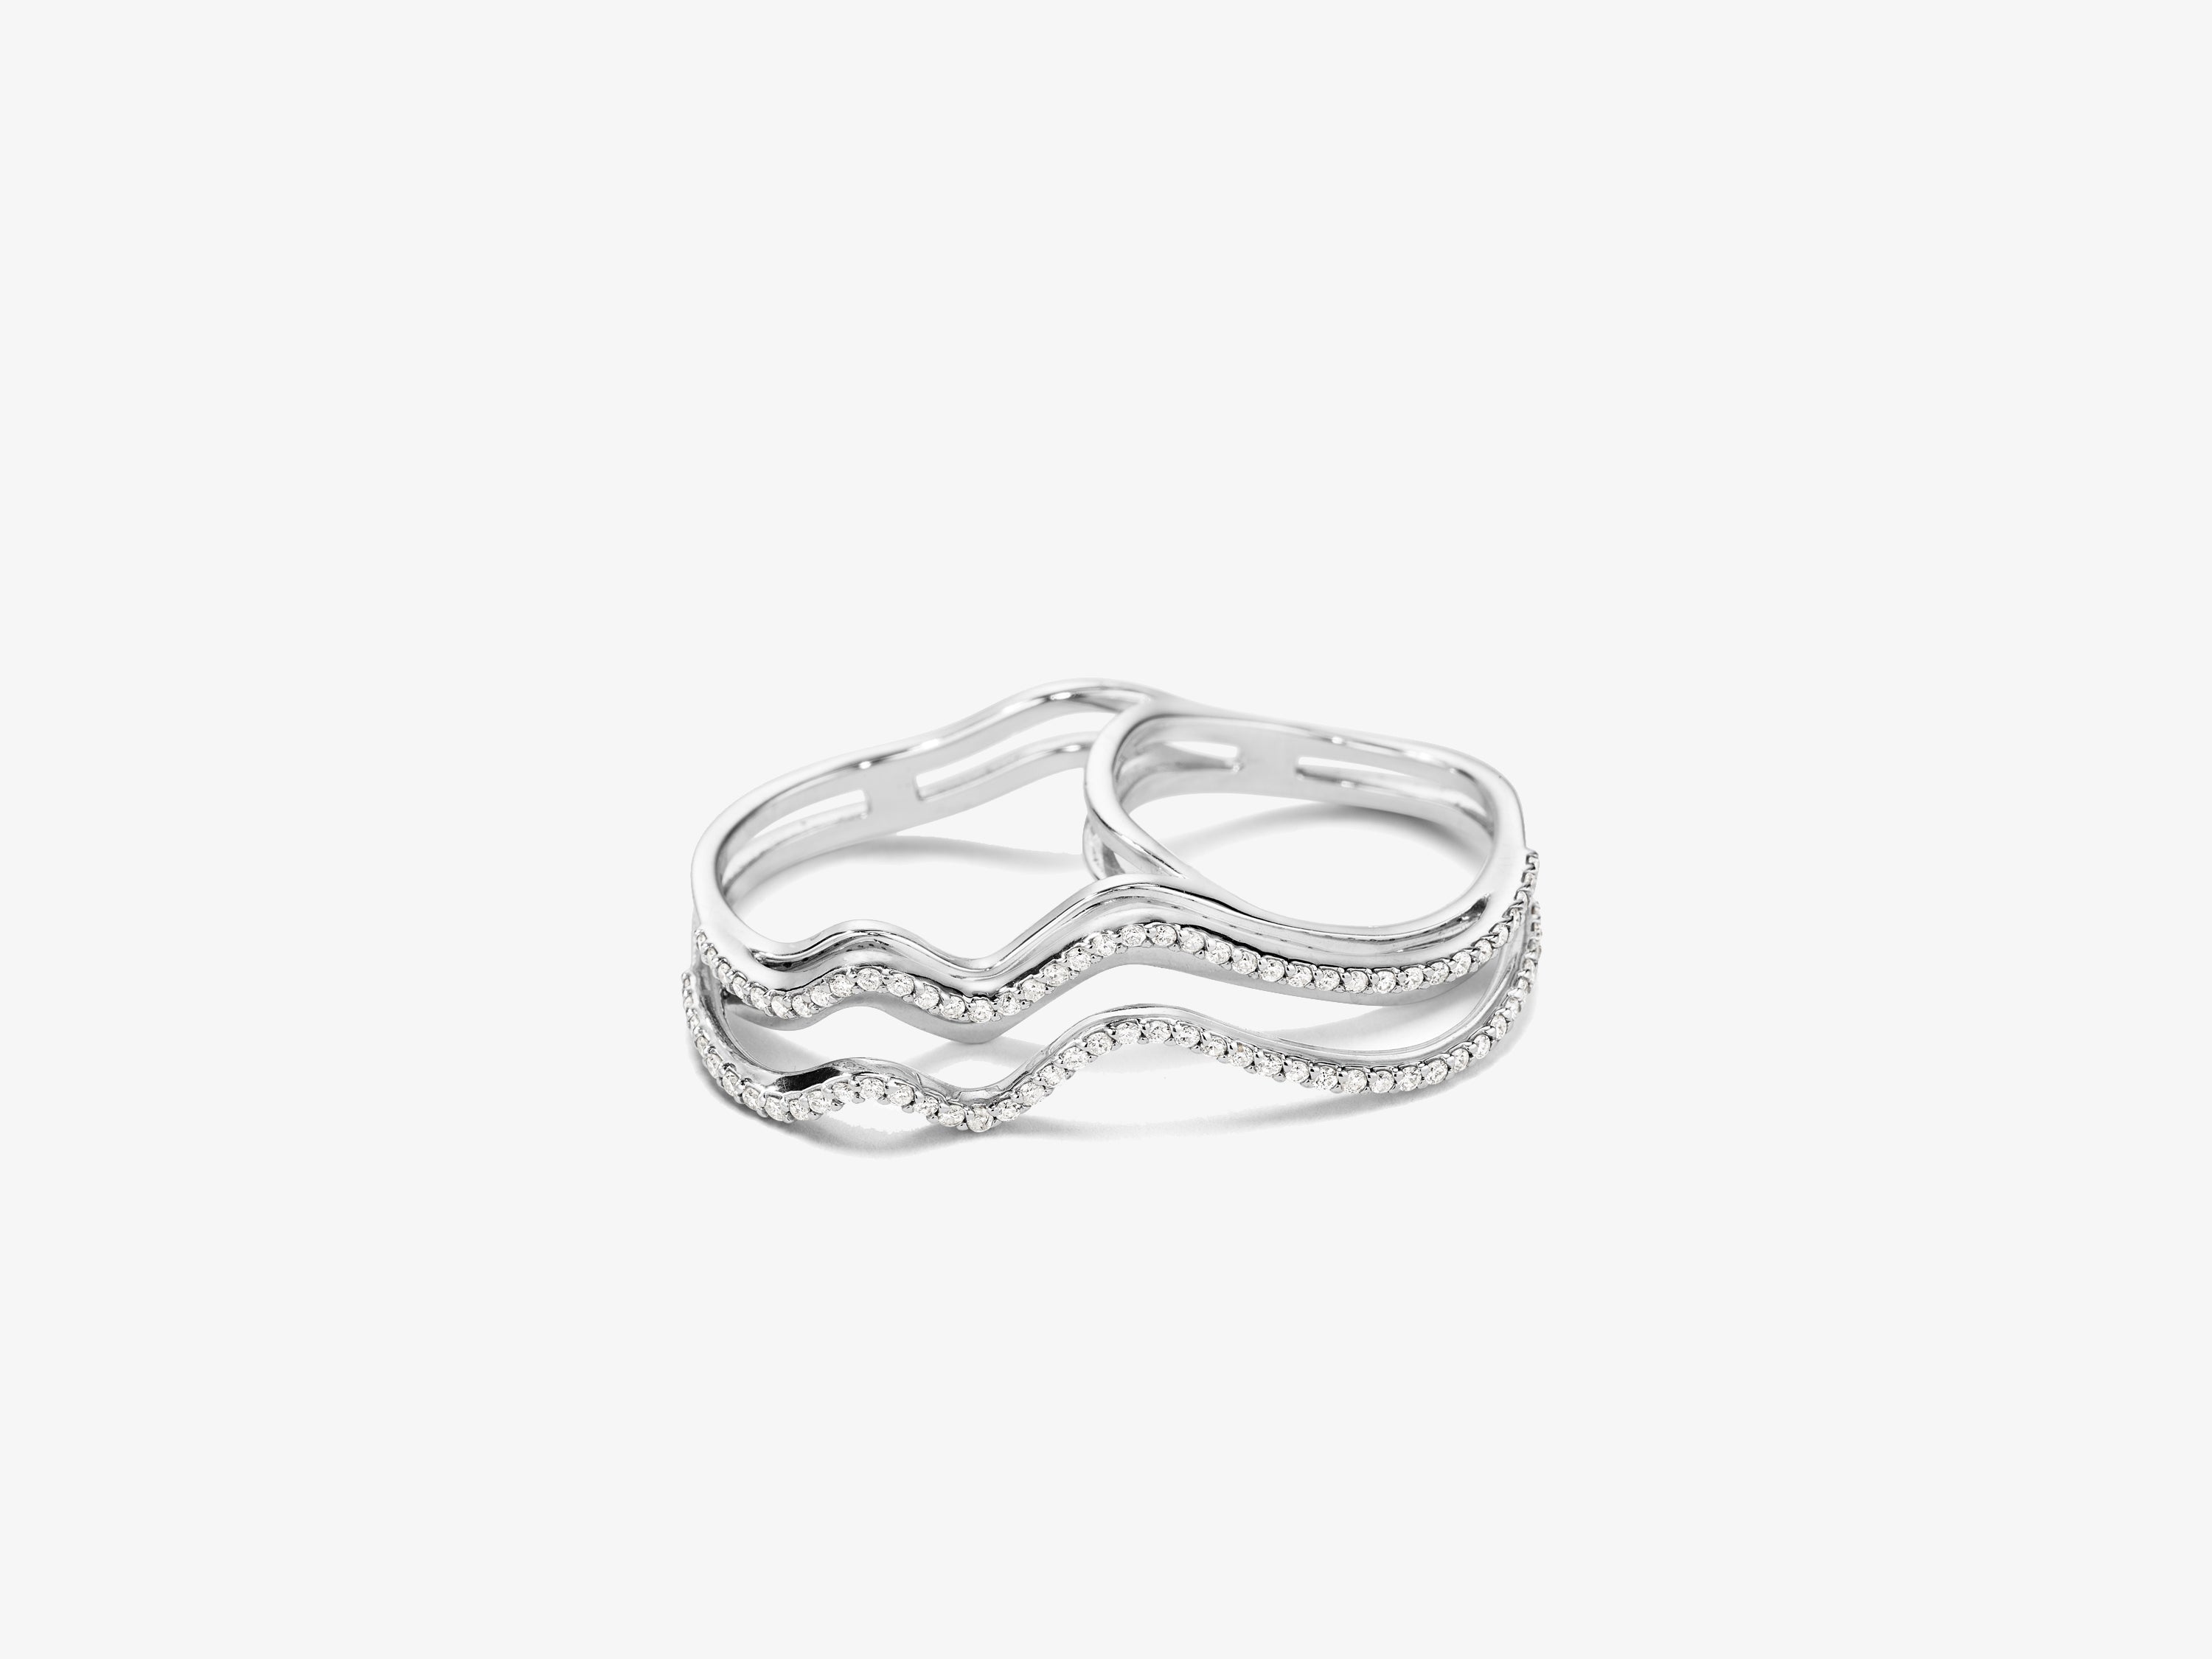 Flow Wavy Three Dimensional Double Finger Ring with Full Diamond Pave